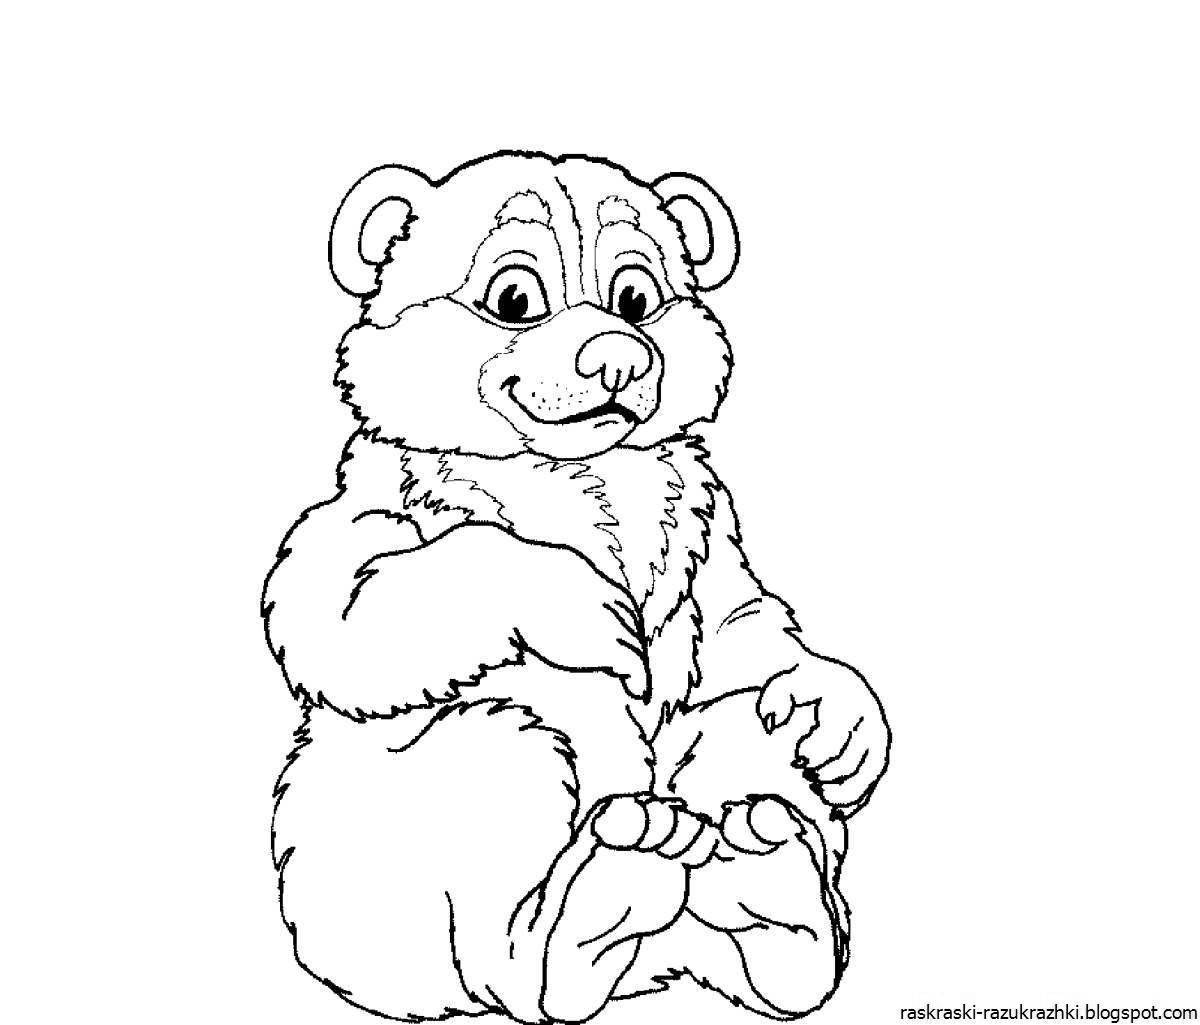 Coloring book joyful bear for children 2-3 years old